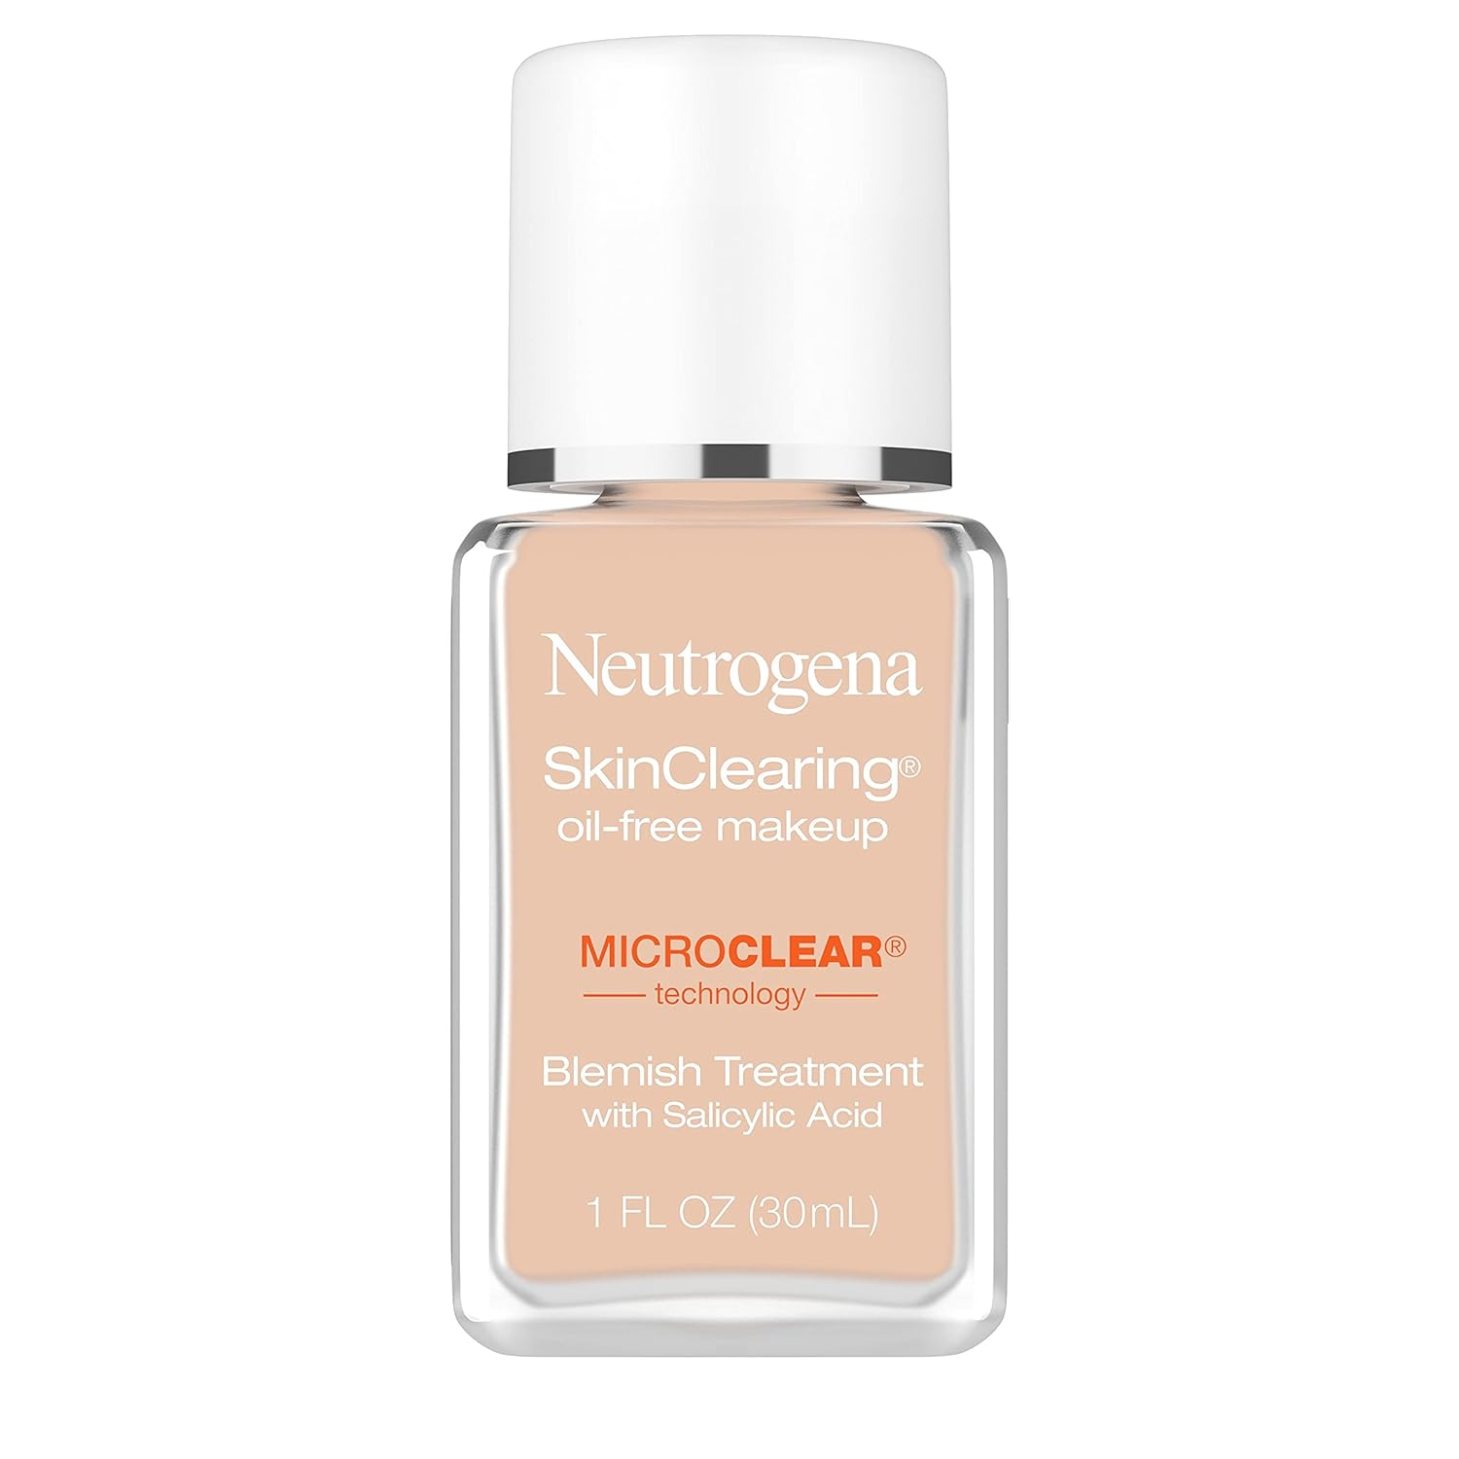 neutrogena skin clearing oil free makeup, one of the best foundations for acne-prone skin